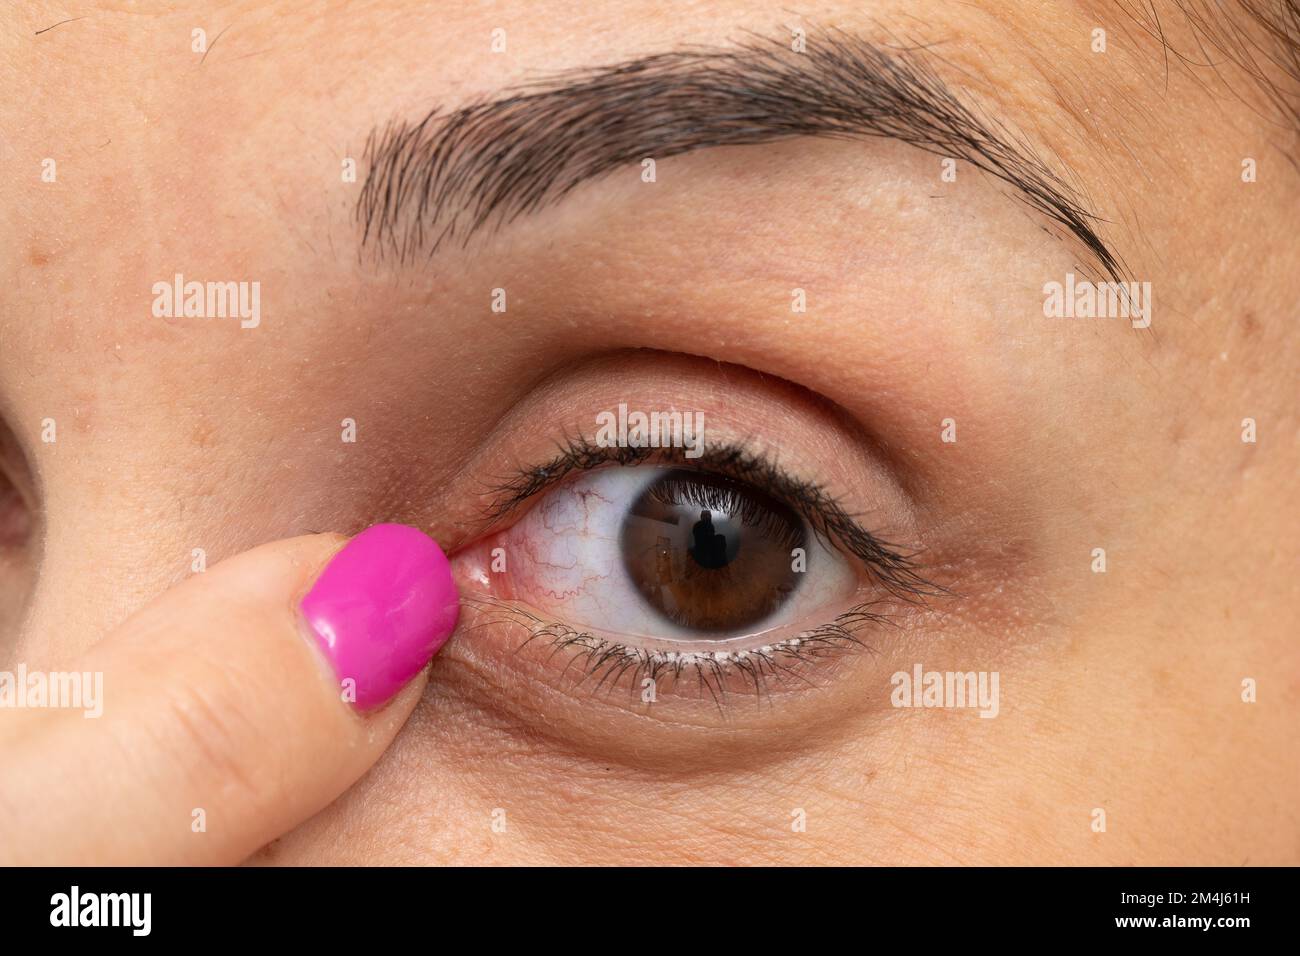 Macro of woman's eye with red capillaries. Finger indicating redness. Concept of allergy and conjunctivitis Stock Photo